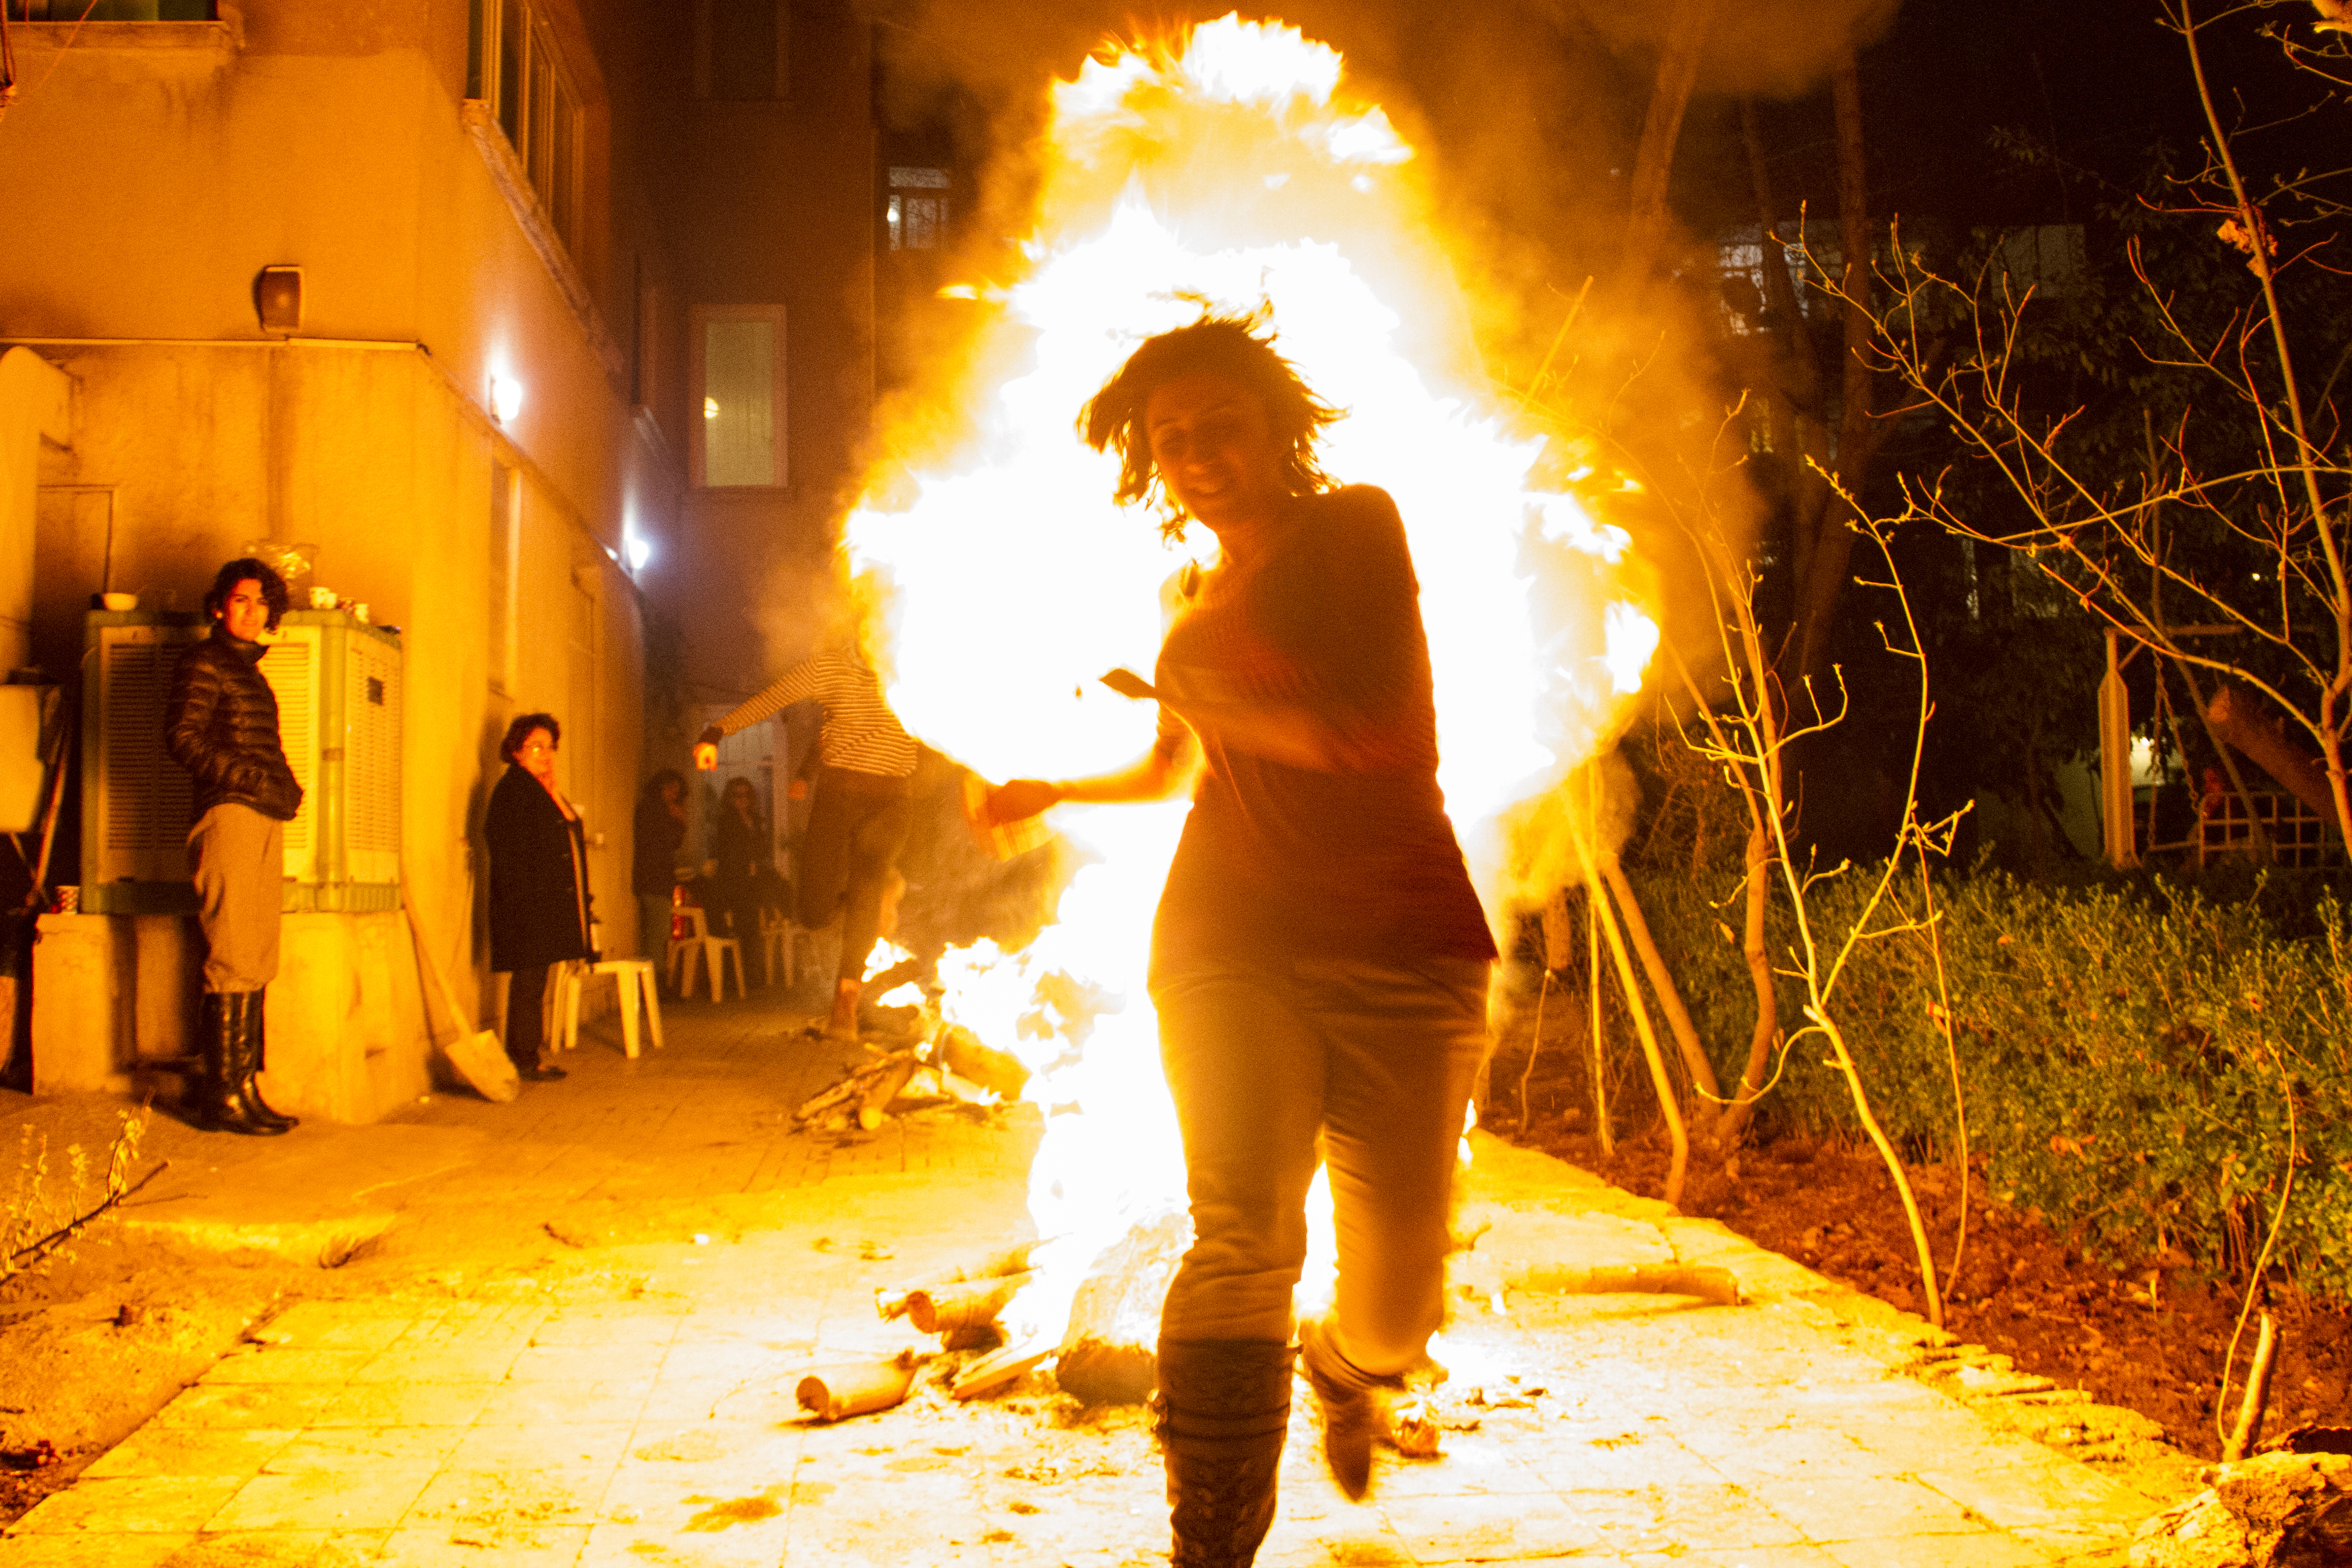 Leaping over the fire on Charshanbeh Suri (photo: Changiz M. Varzi)